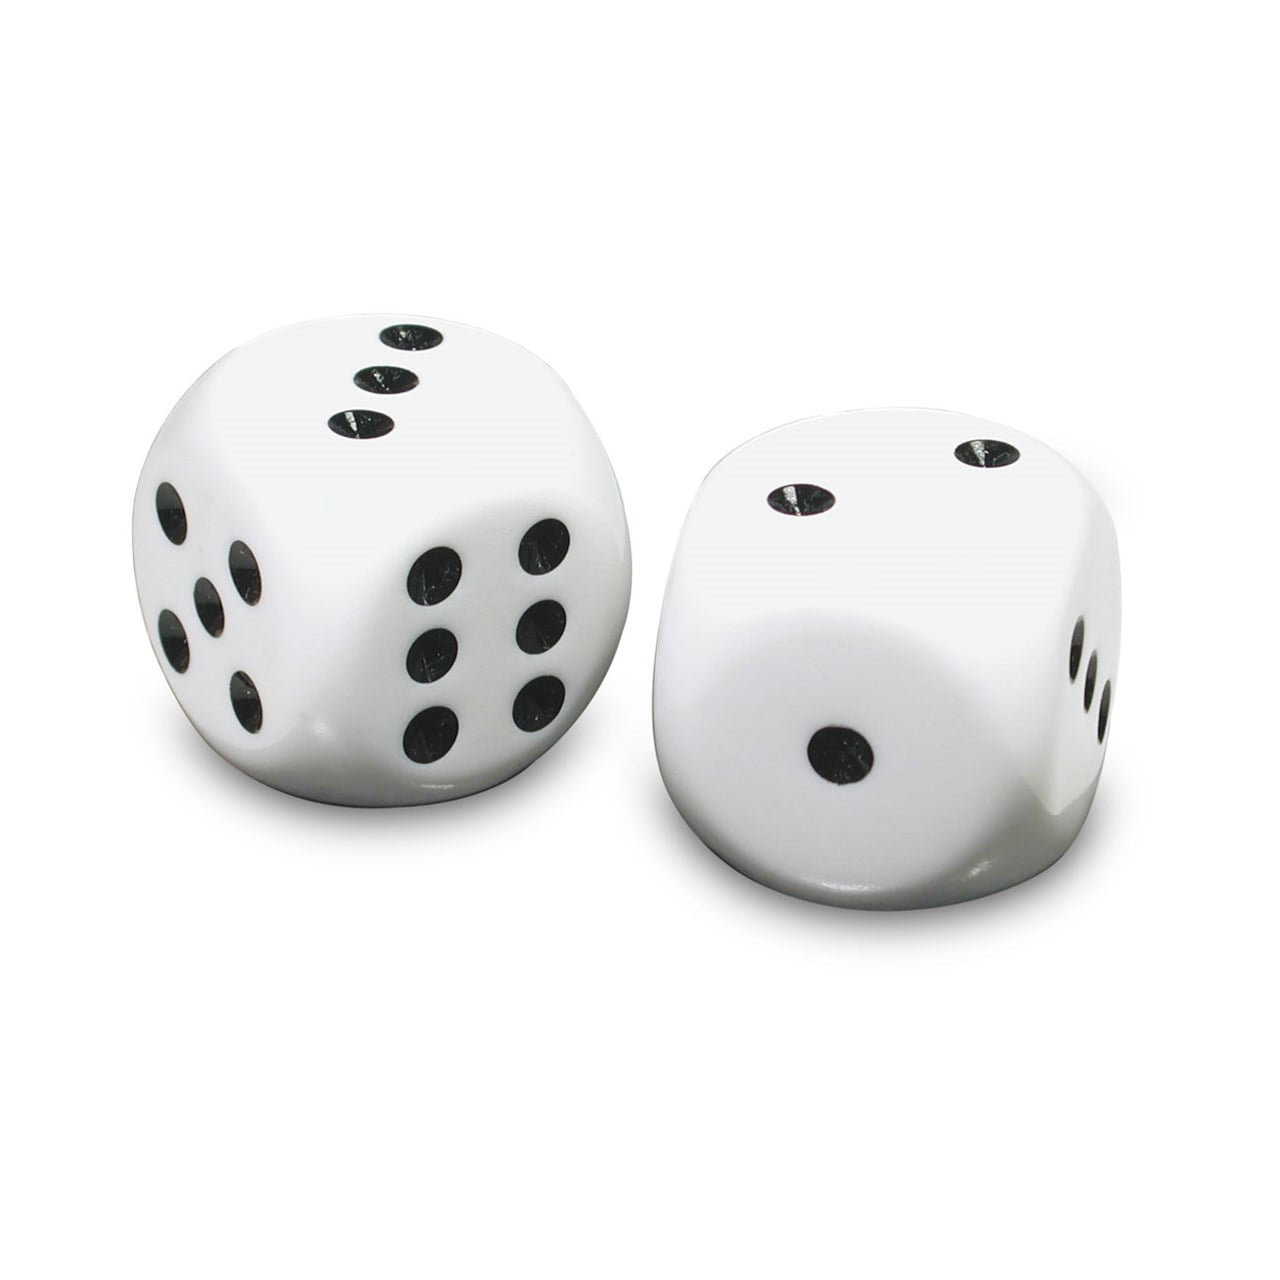 A pair of white D6 15 mm wide rolling dice with black dot results 